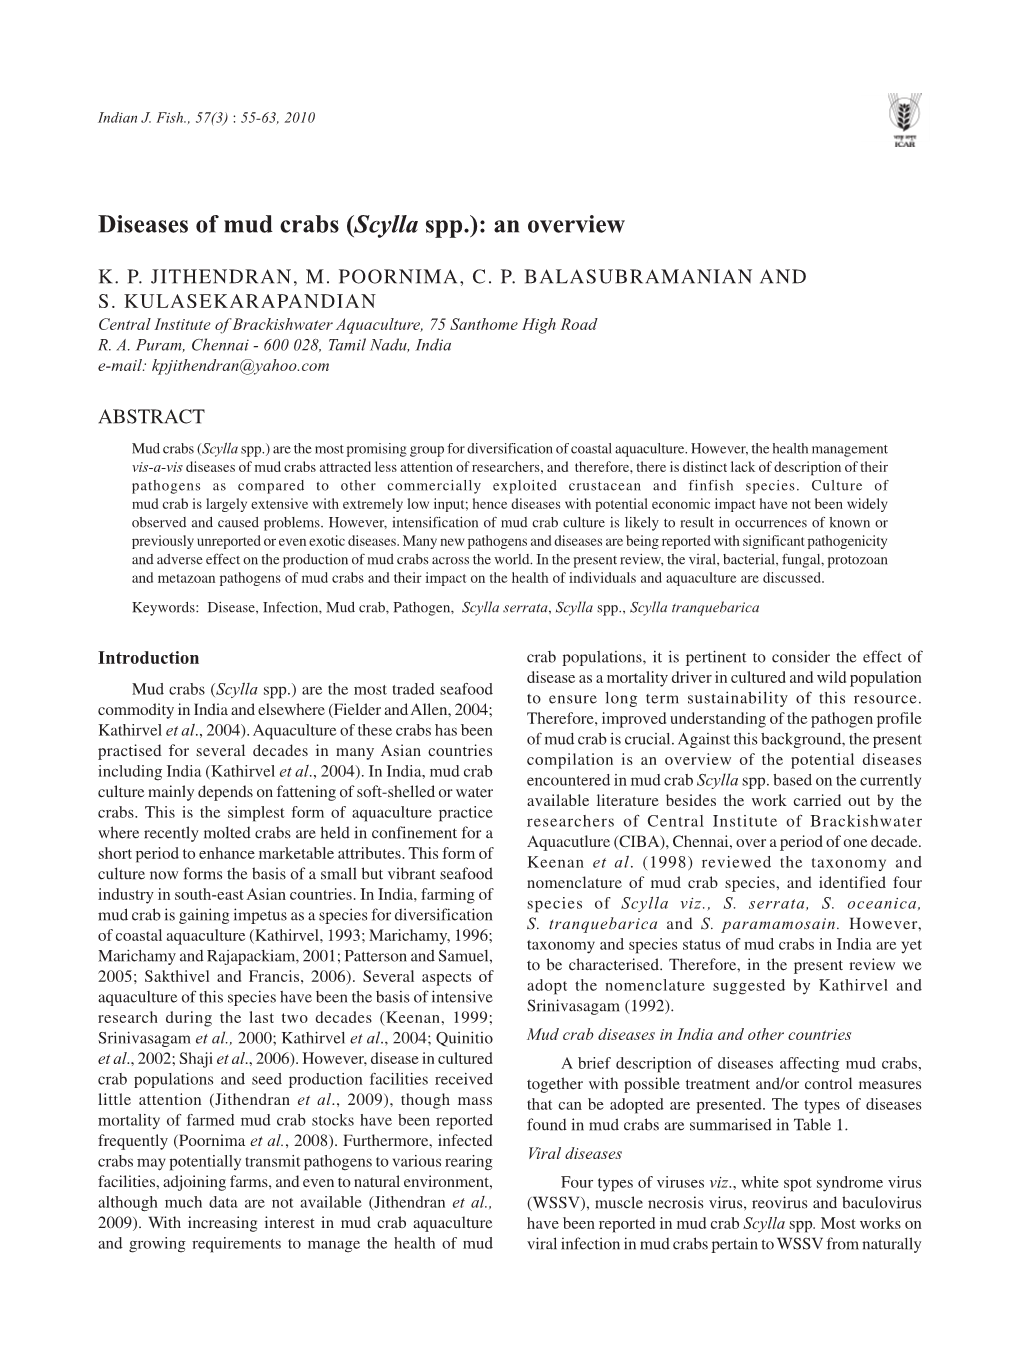 Diseases of Mud Crabs (Scylla Spp.): an Overview